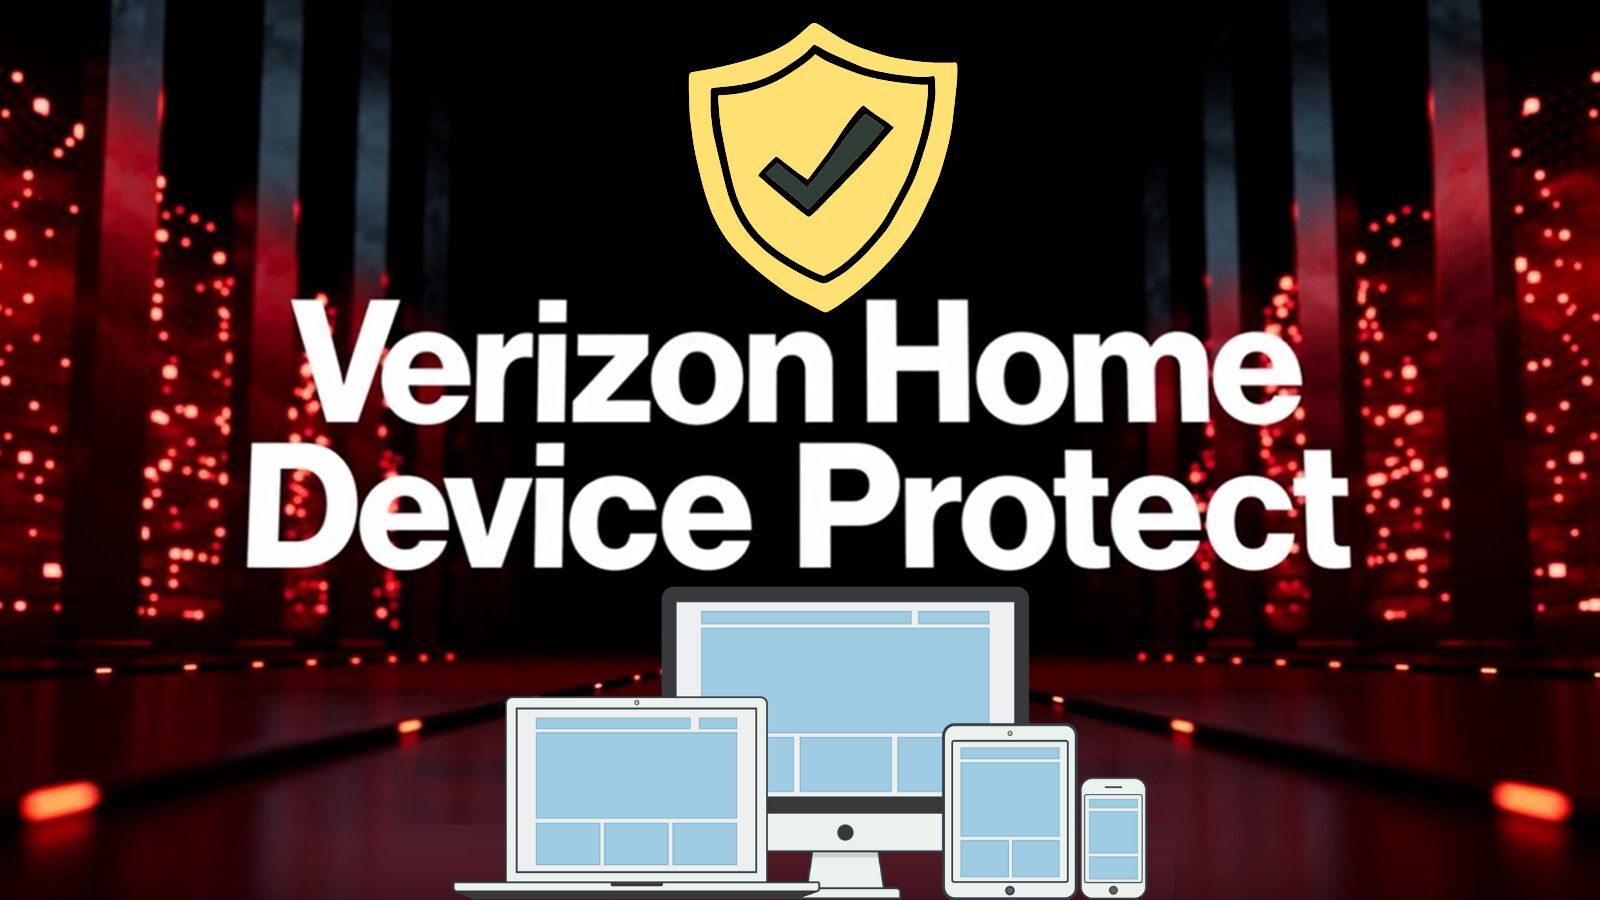 Verizon Home Device Protection (Cover Items, Eligible, and Cost)